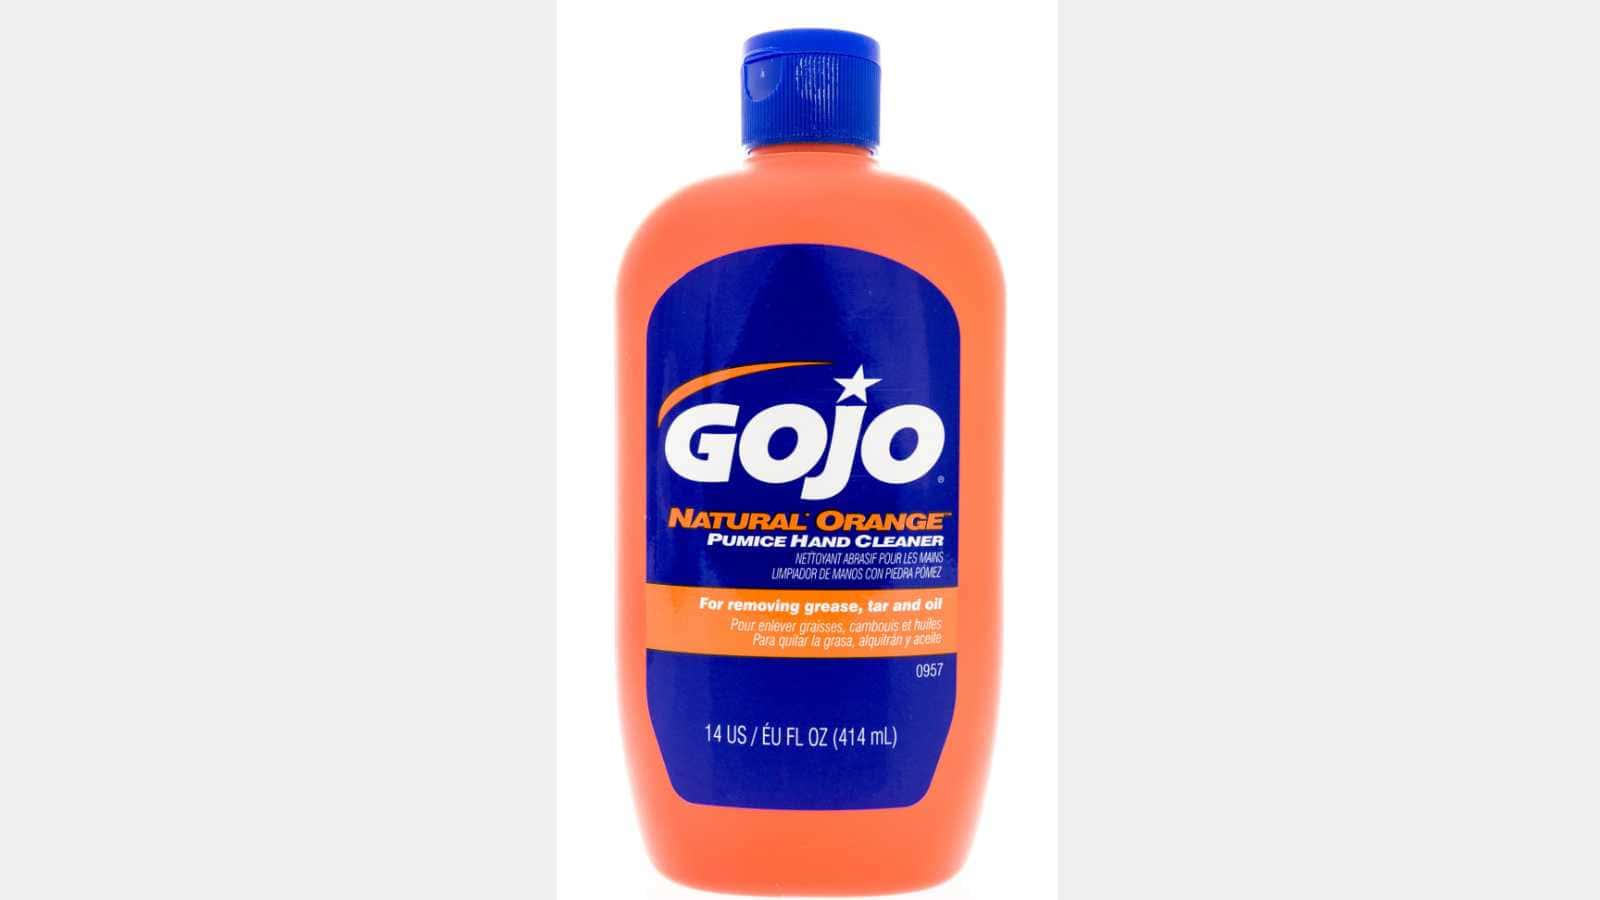 Winneconne, WI - 7 August 2018: A bottle of Gojo natural orange hand cleaner on an isolated background
